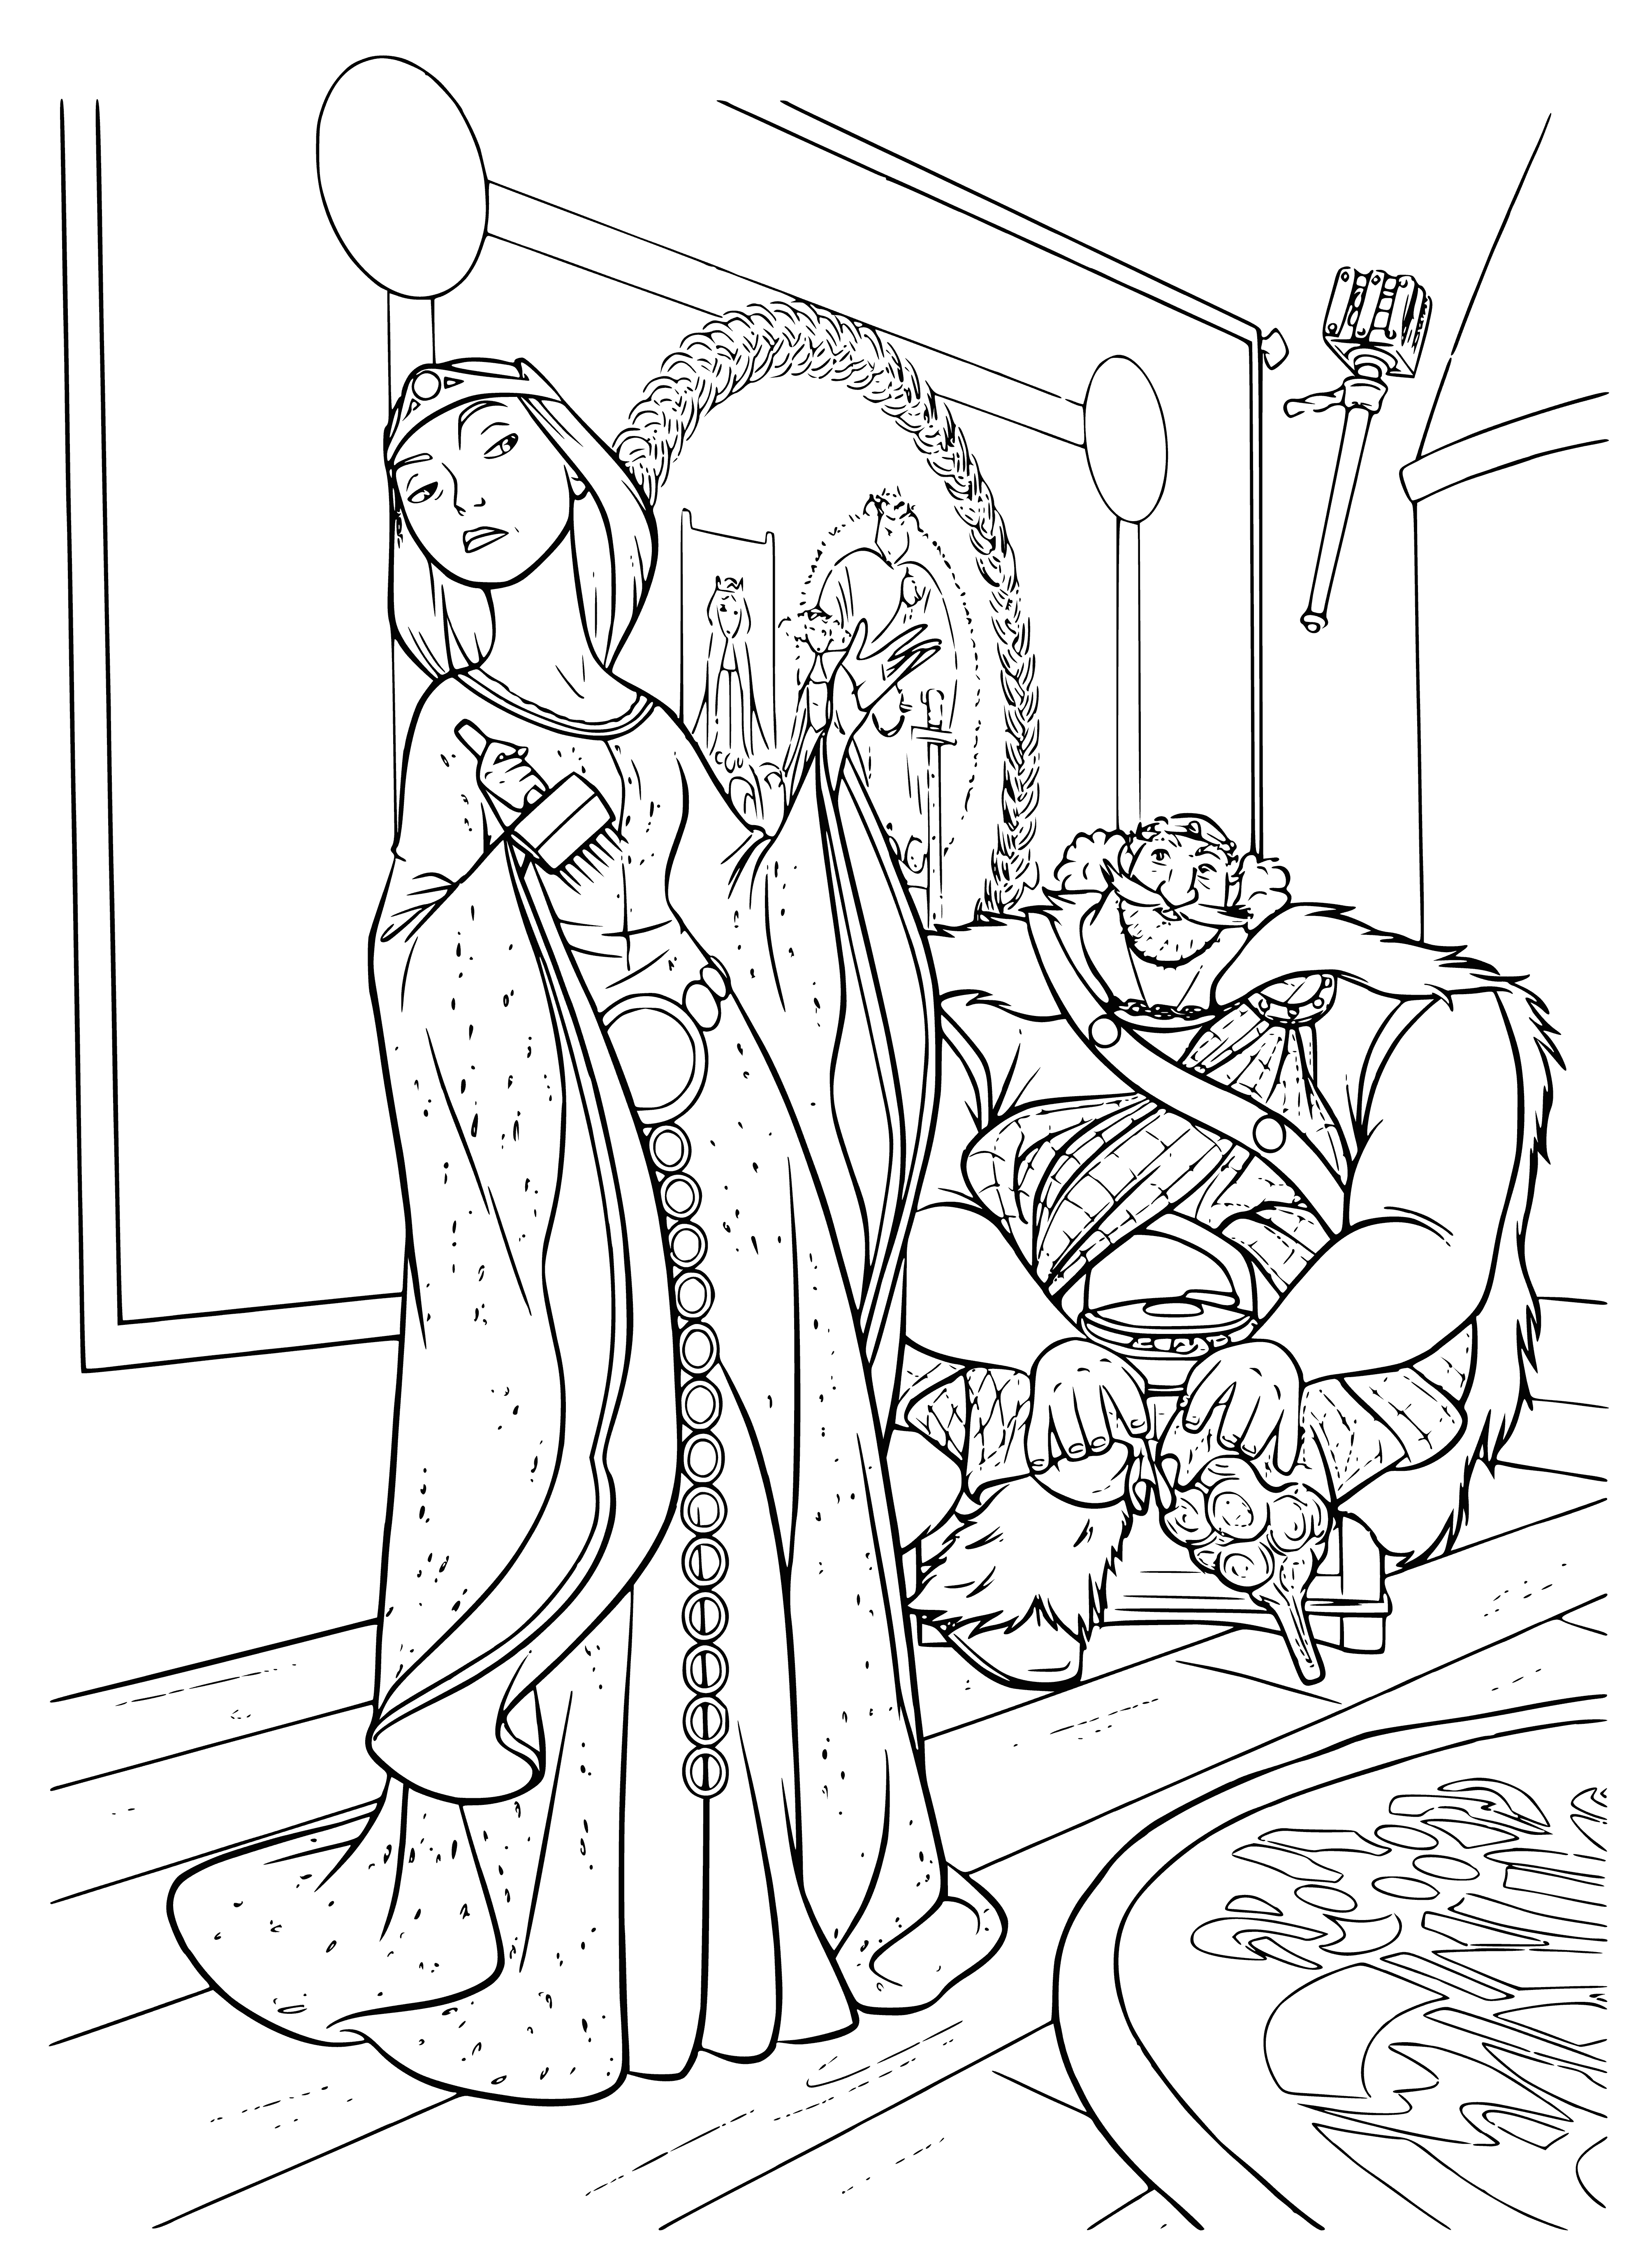 The king and queen argue coloring page